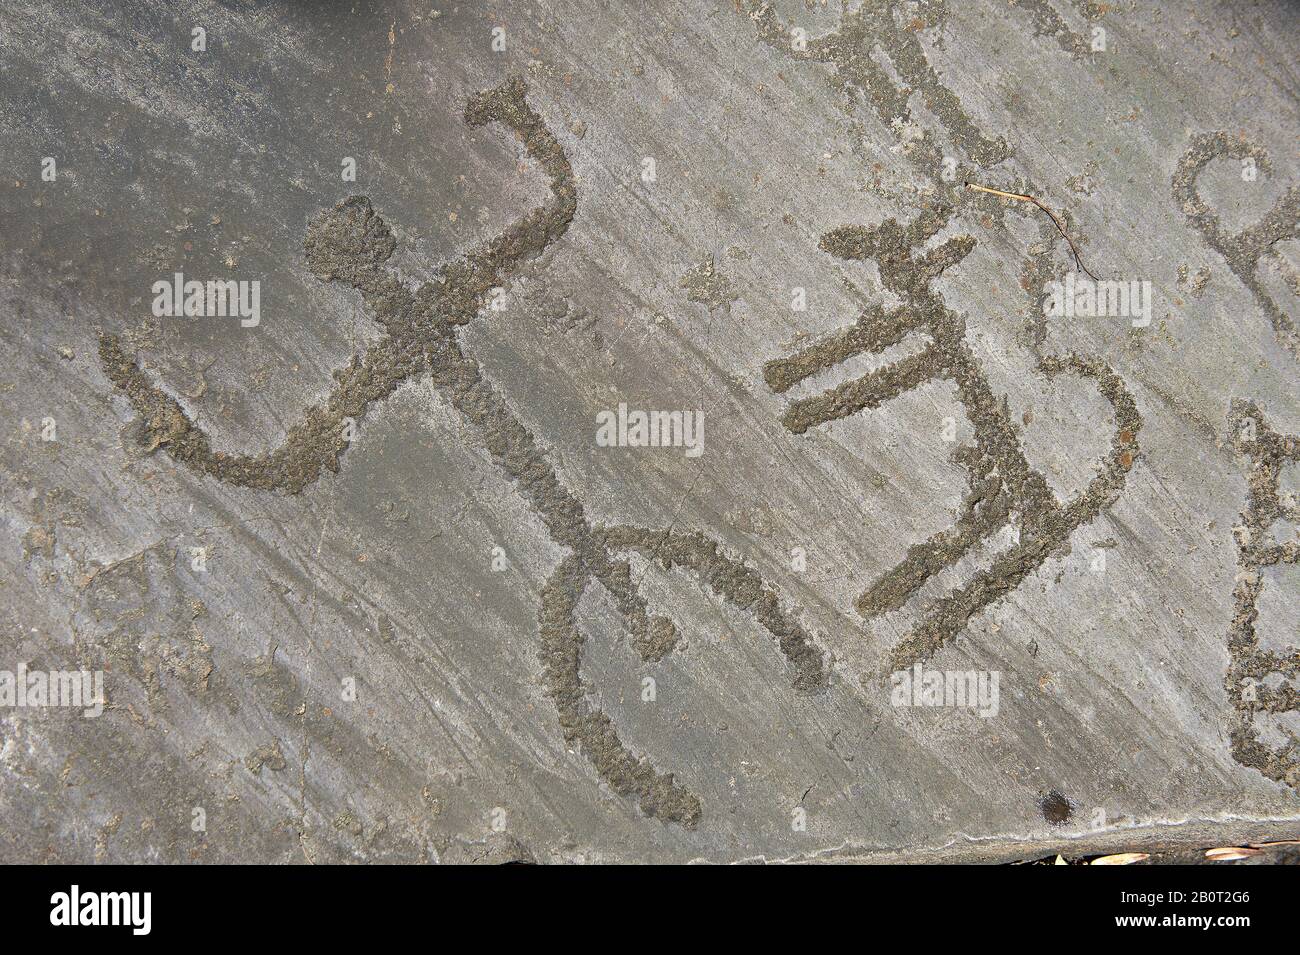 Petroglyph, rock carving, of a schematic dog and human figure. Carved by the ancient Camunni people in the copper age between 3200-2200 BC. Rock no 29 Stock Photo